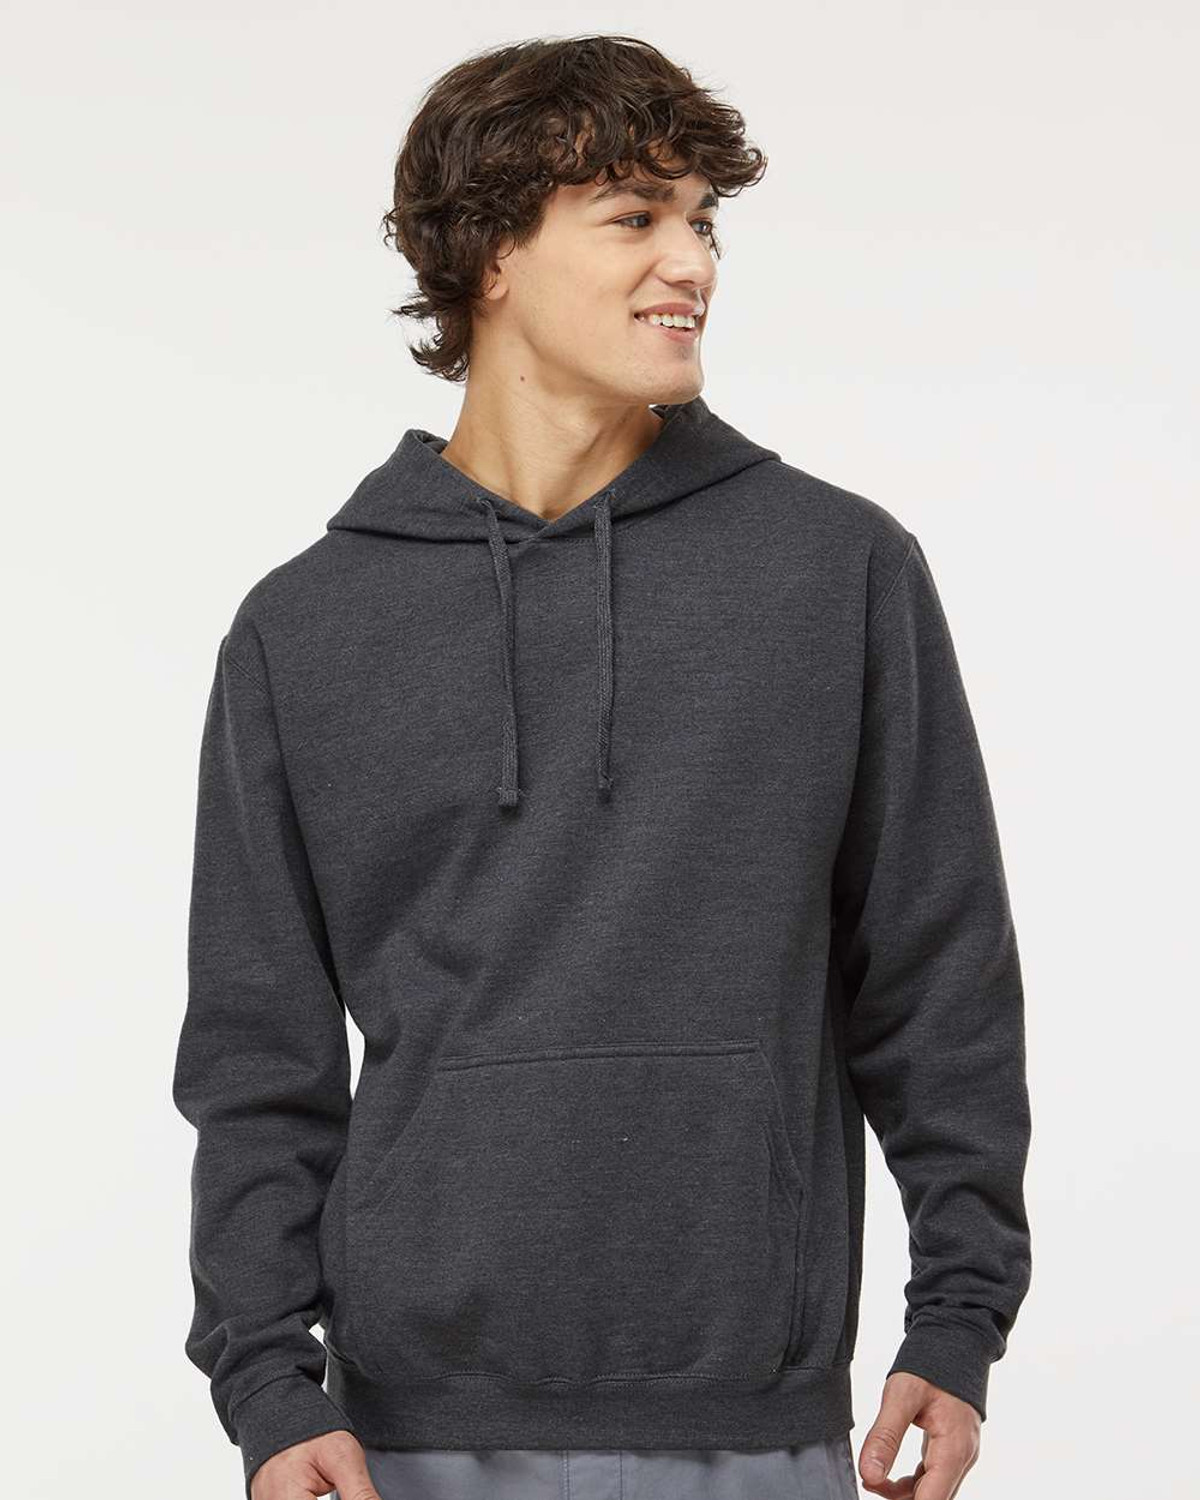 M&O 3320 Unisex Pullover Hoodie